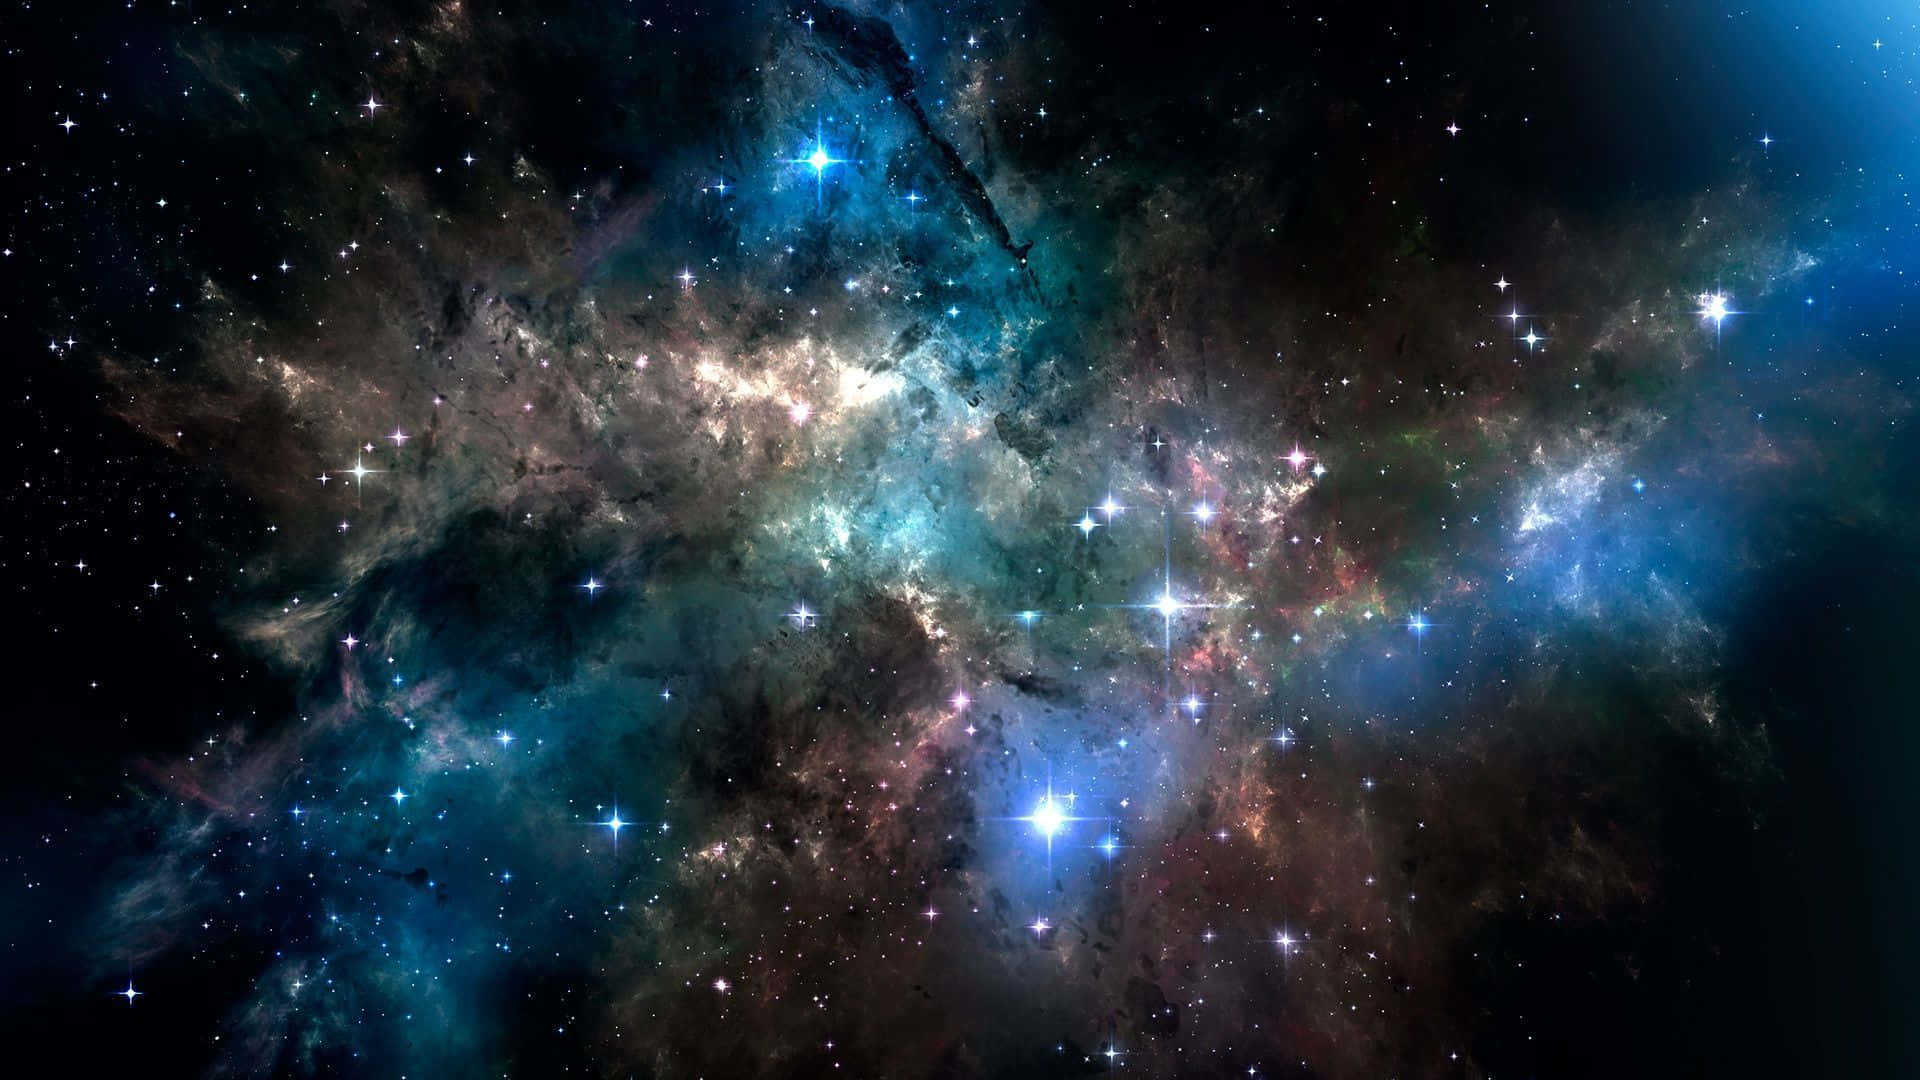 The power of the cosmos is manifested in this awe-inspiring image of real space. Wallpaper